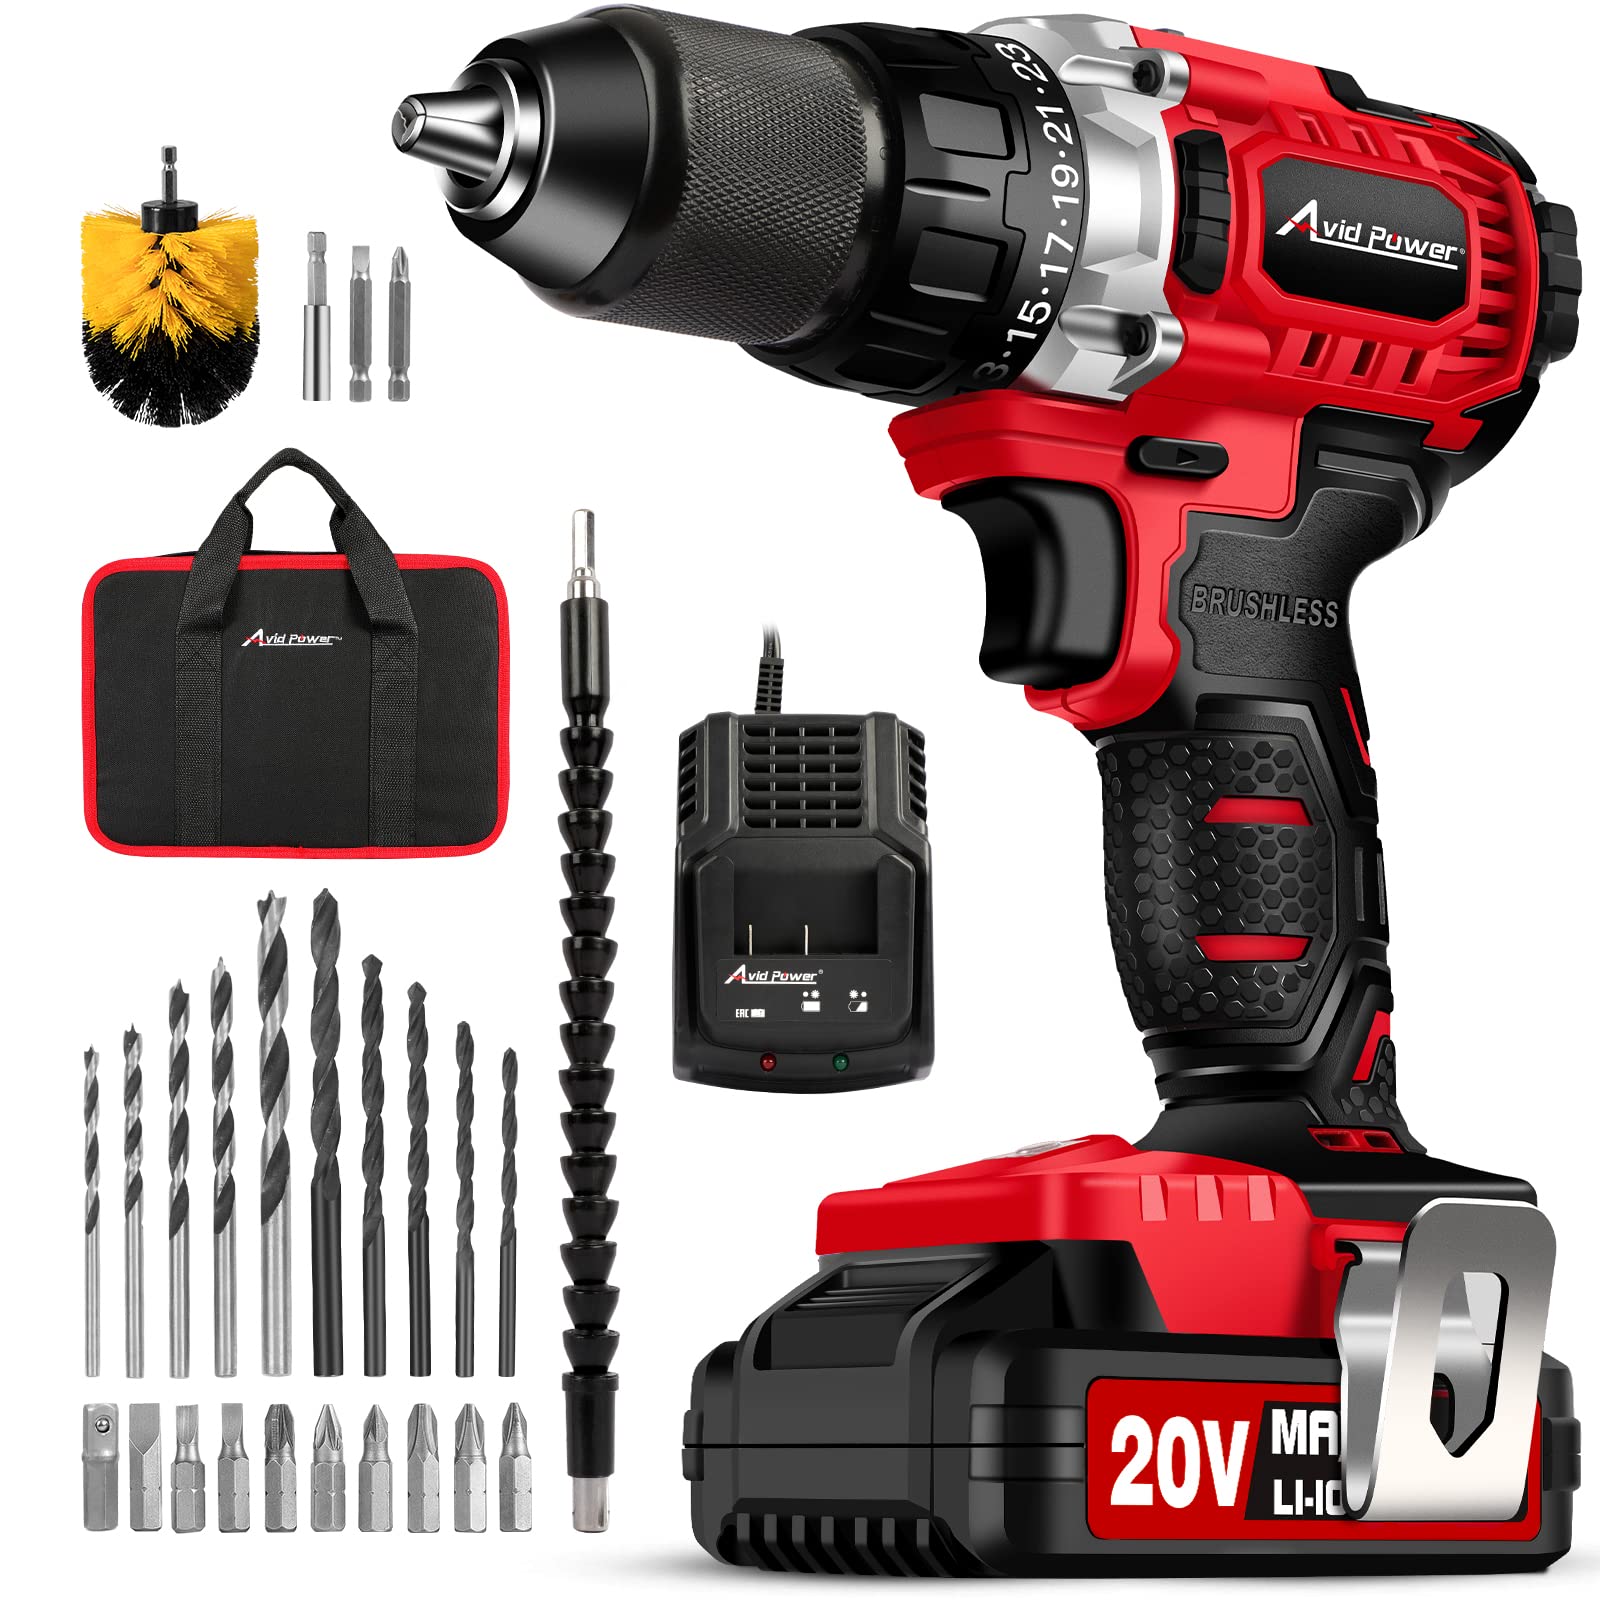 AVID POWER Brushless Drill Set, 20V Cordless Drill Driver Kit with 2.0Ah Battery and Fast Charger, 1/2-Inch Metal Chuck, 400 In-lbs Torque, 2-Variable Speed, 28pcs Accessories and Tool Bag